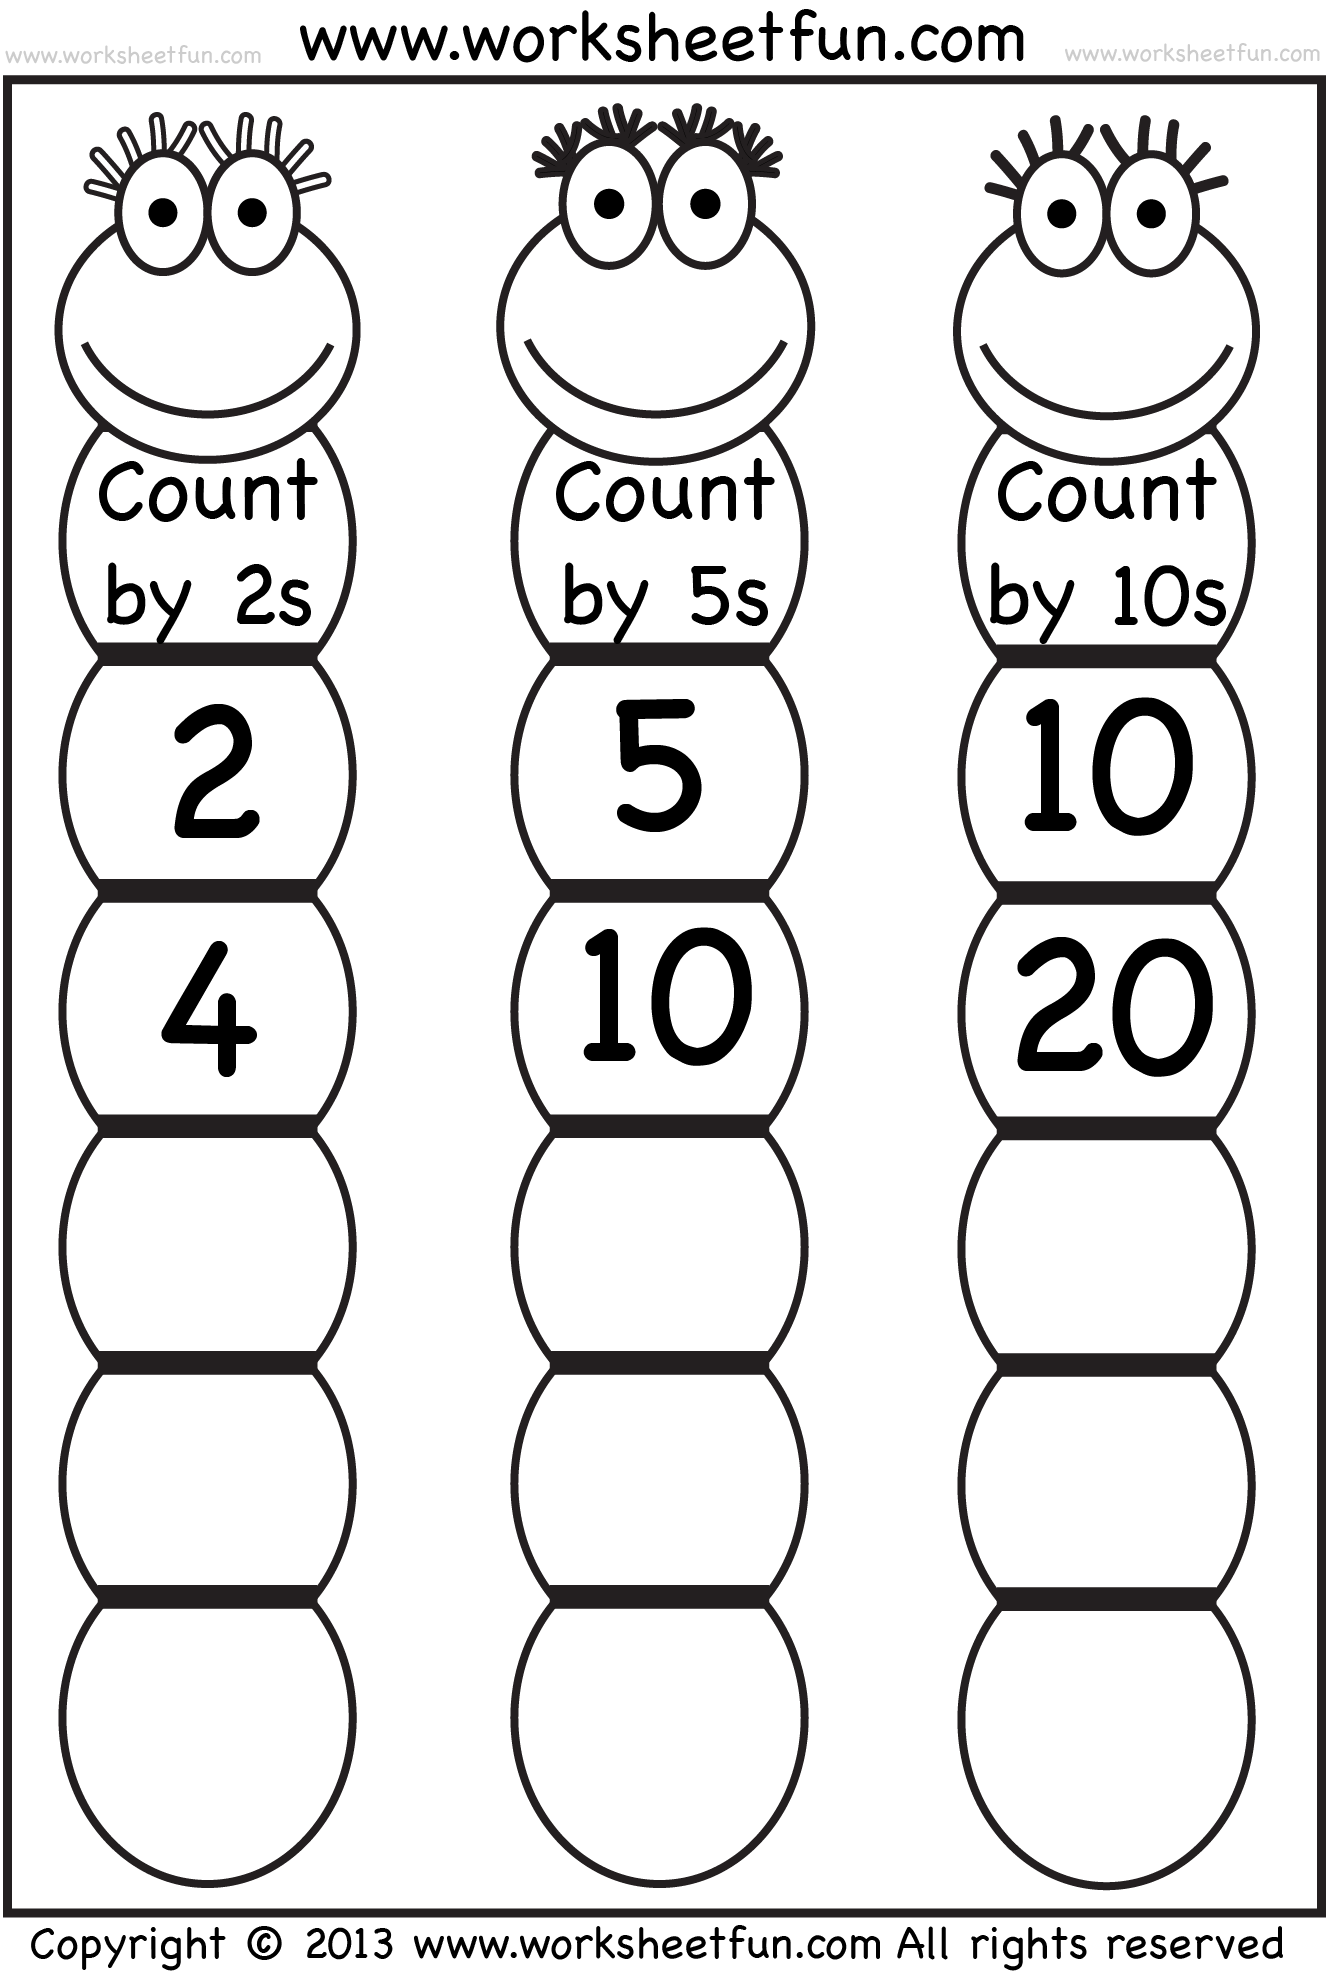 skip-counting-by-10-printables